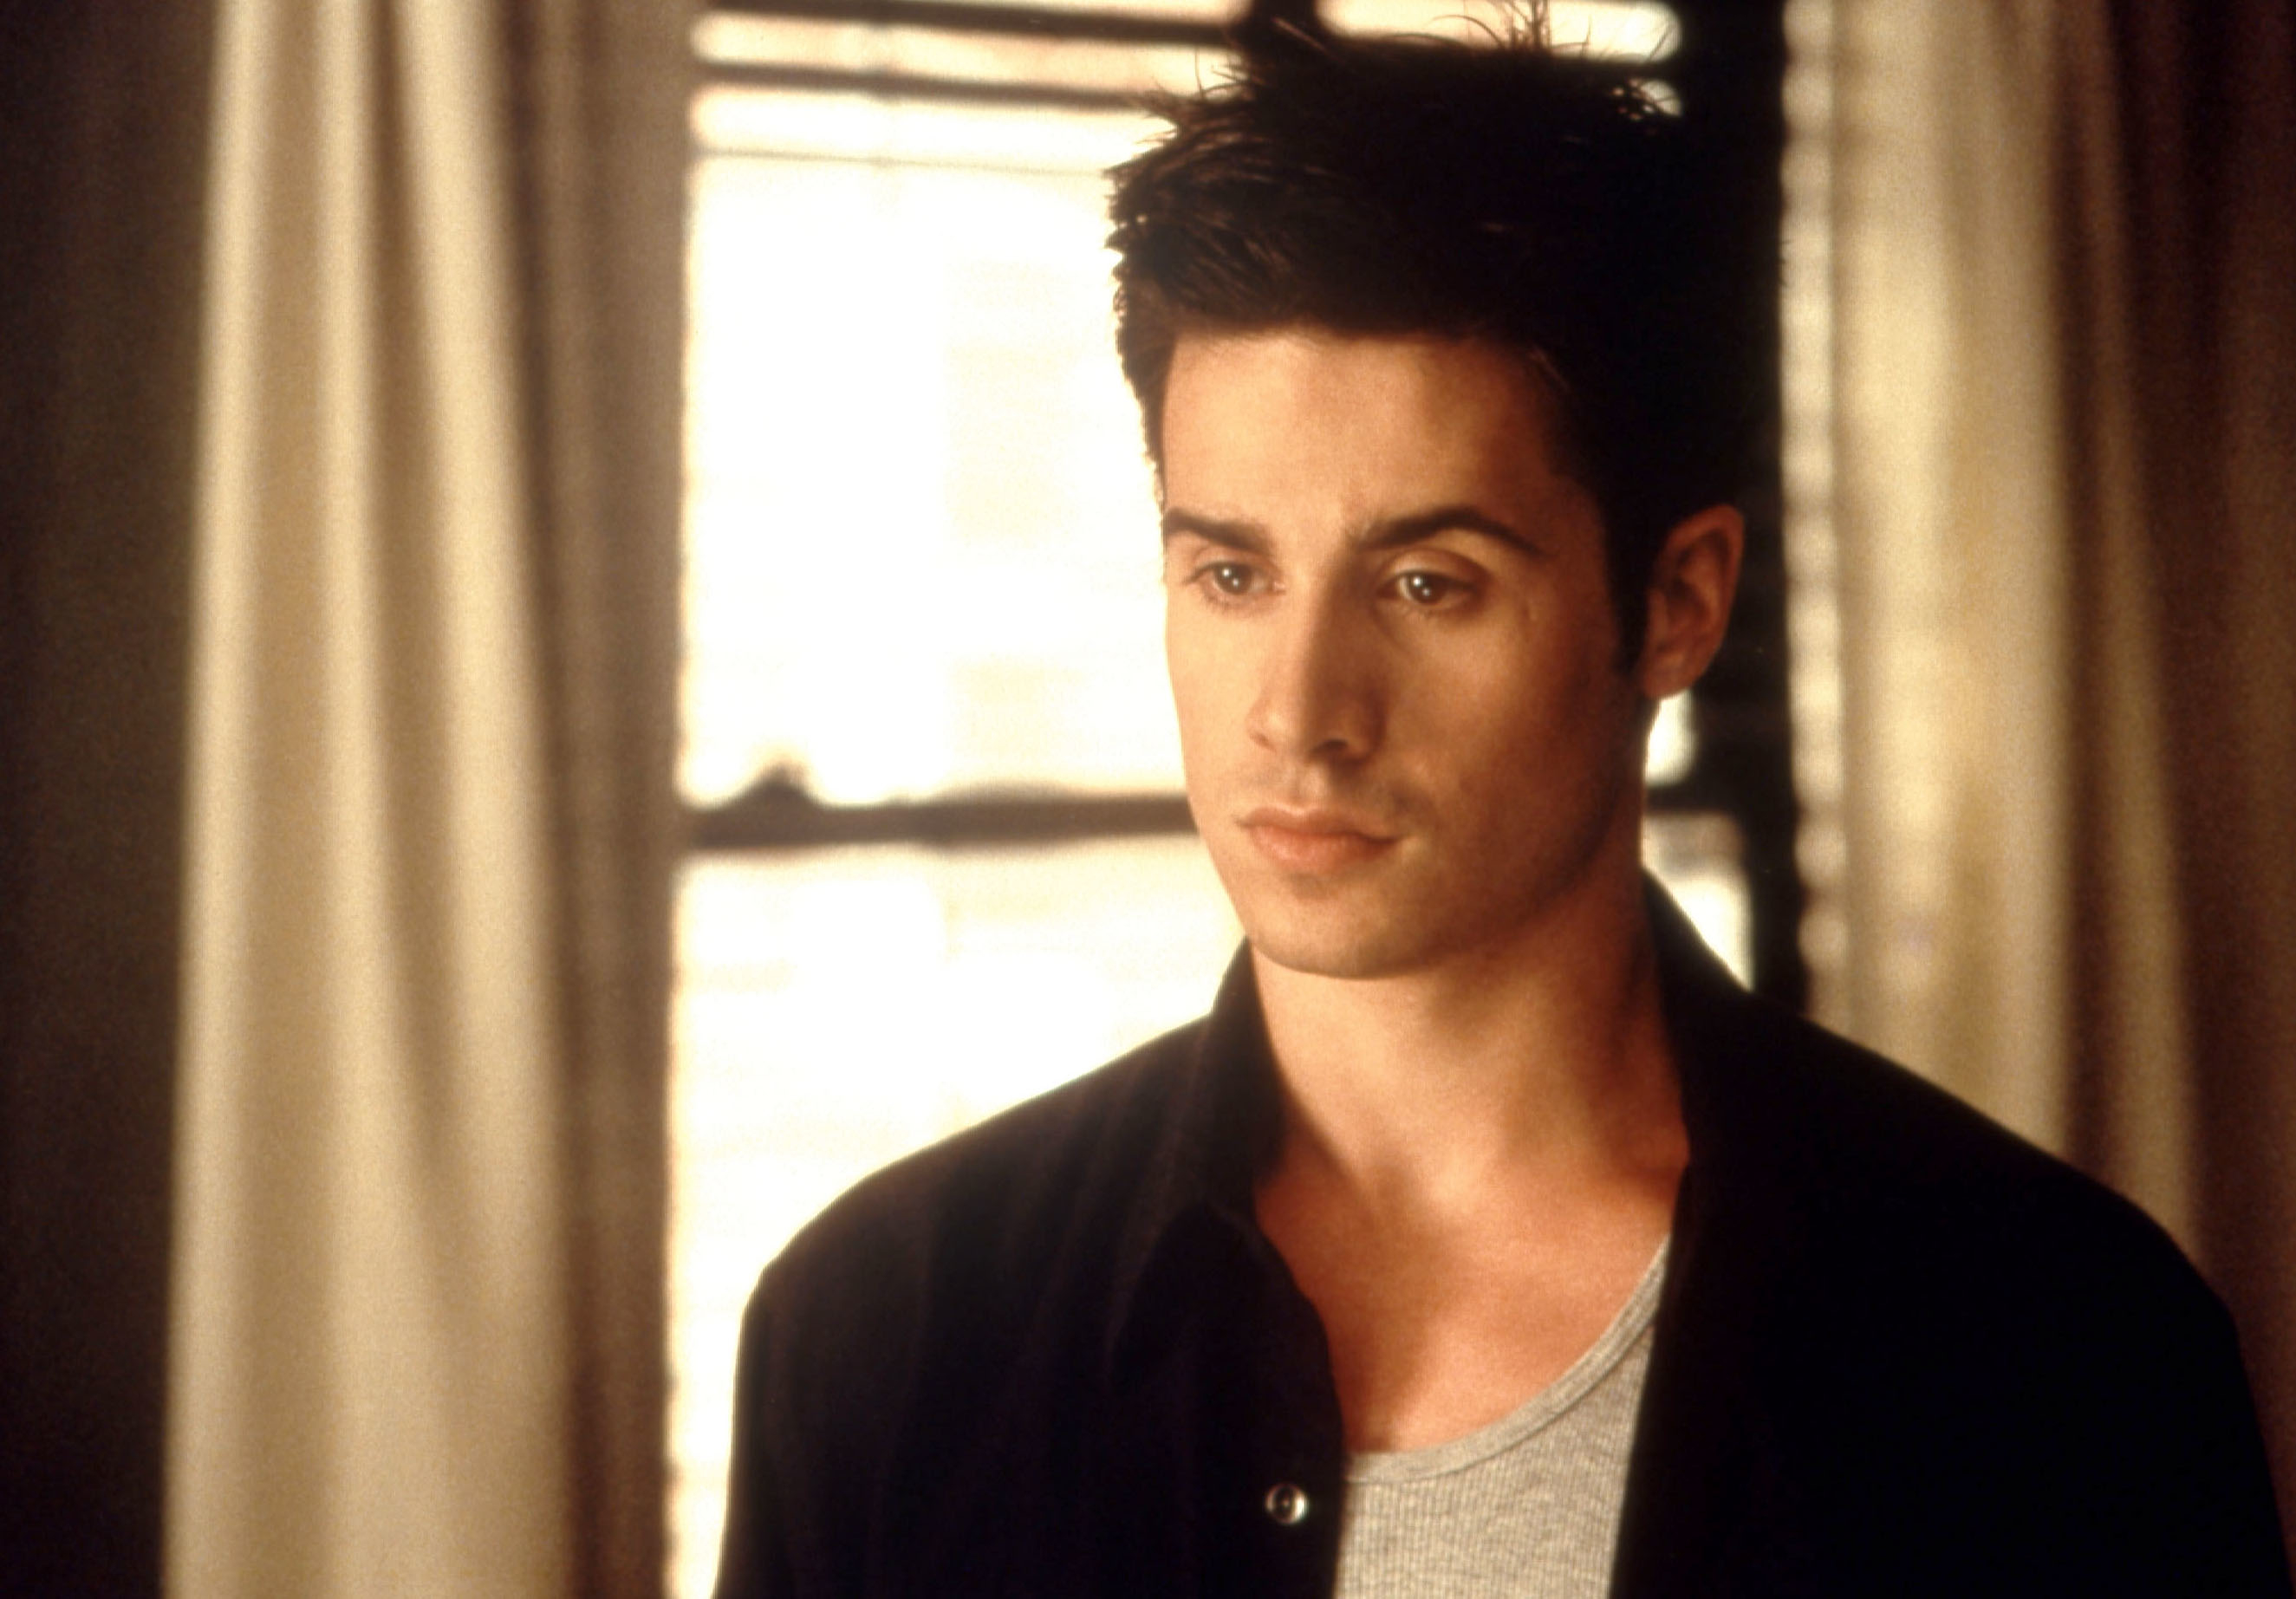 in a scene, Freddie with a contemplative look, in a dark shirt layered over a lighter one